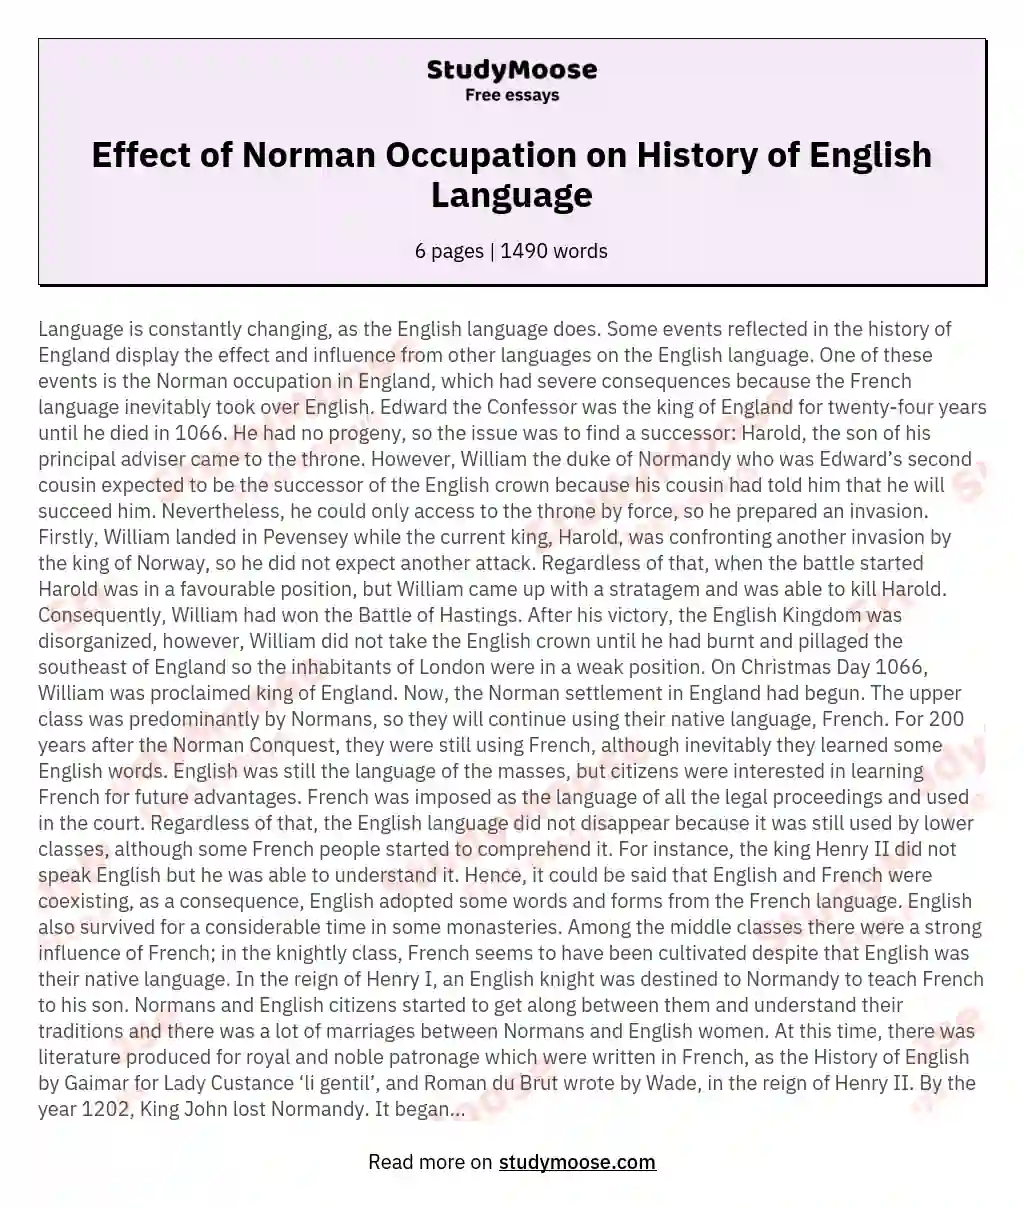 Effect of Norman Occupation on History of English Language essay